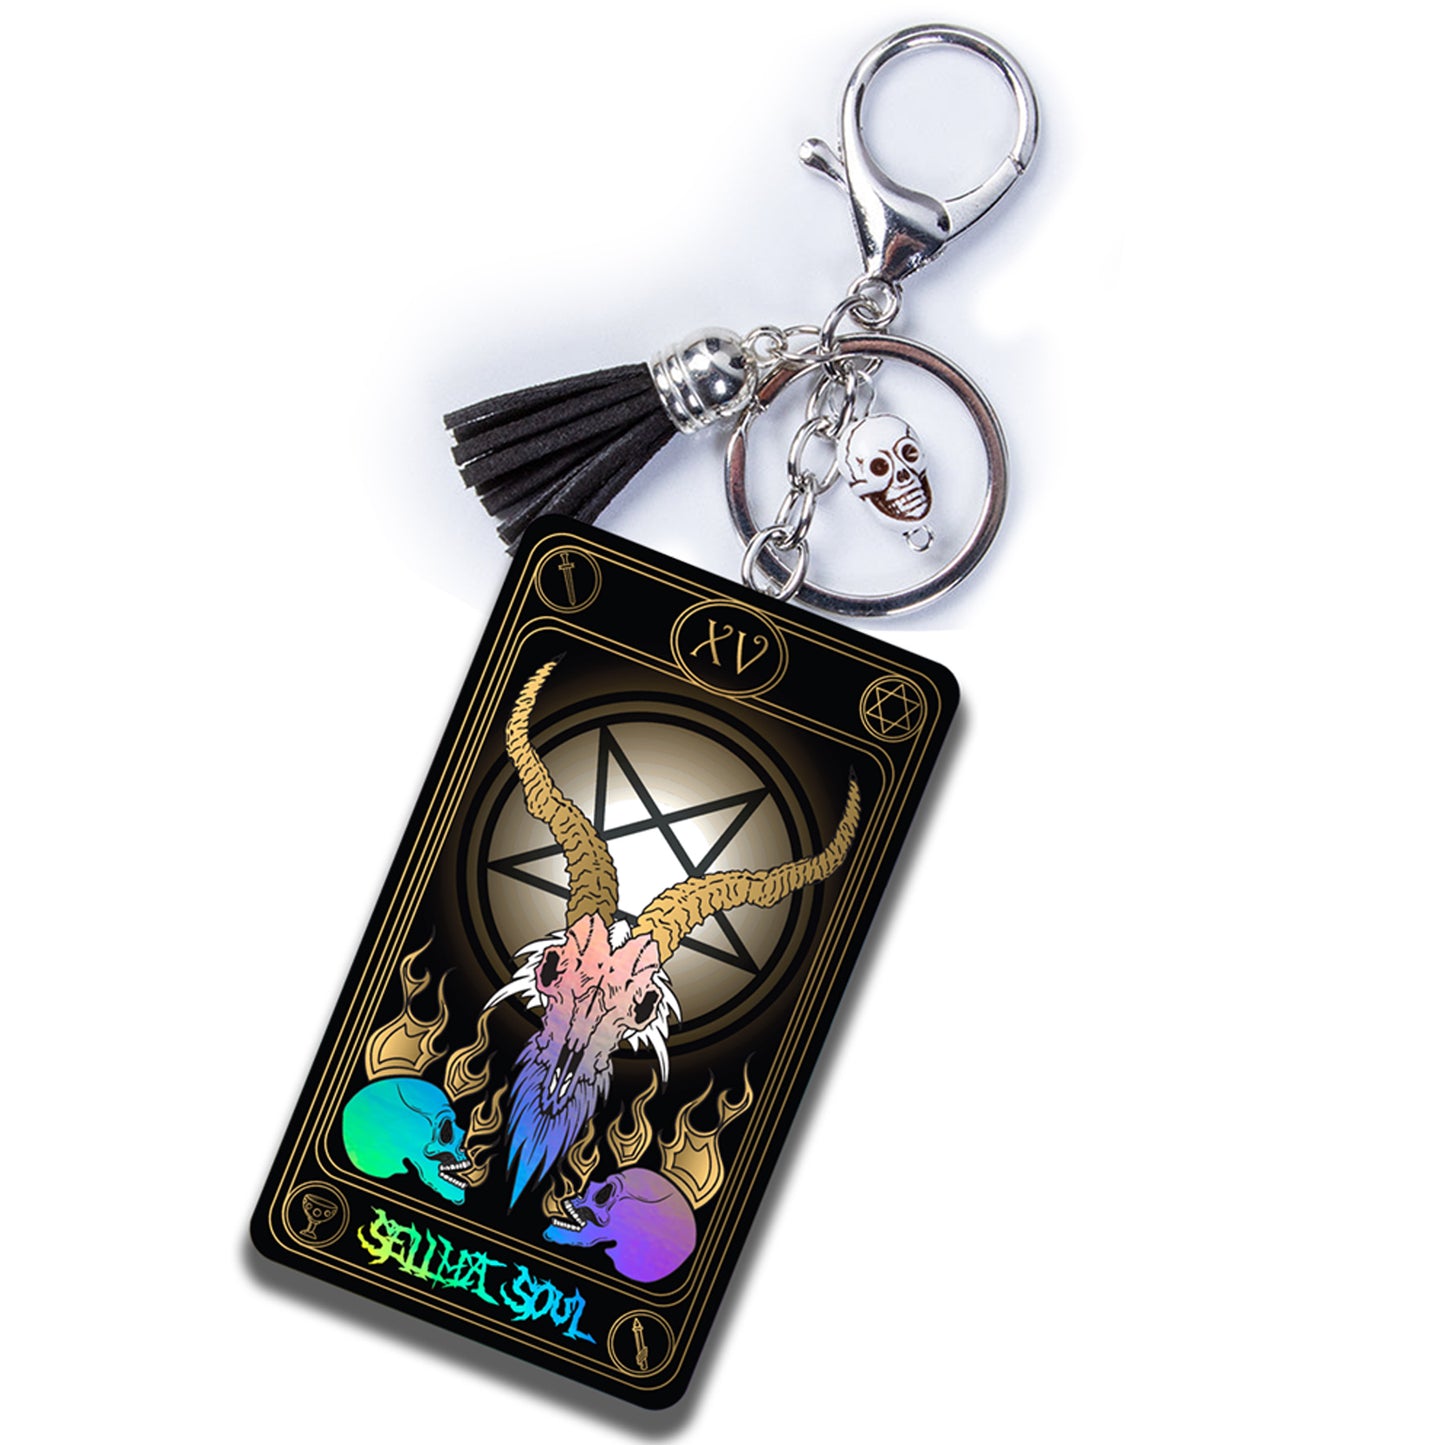 SELL YOUR SOUL Holographic Tarot keychain